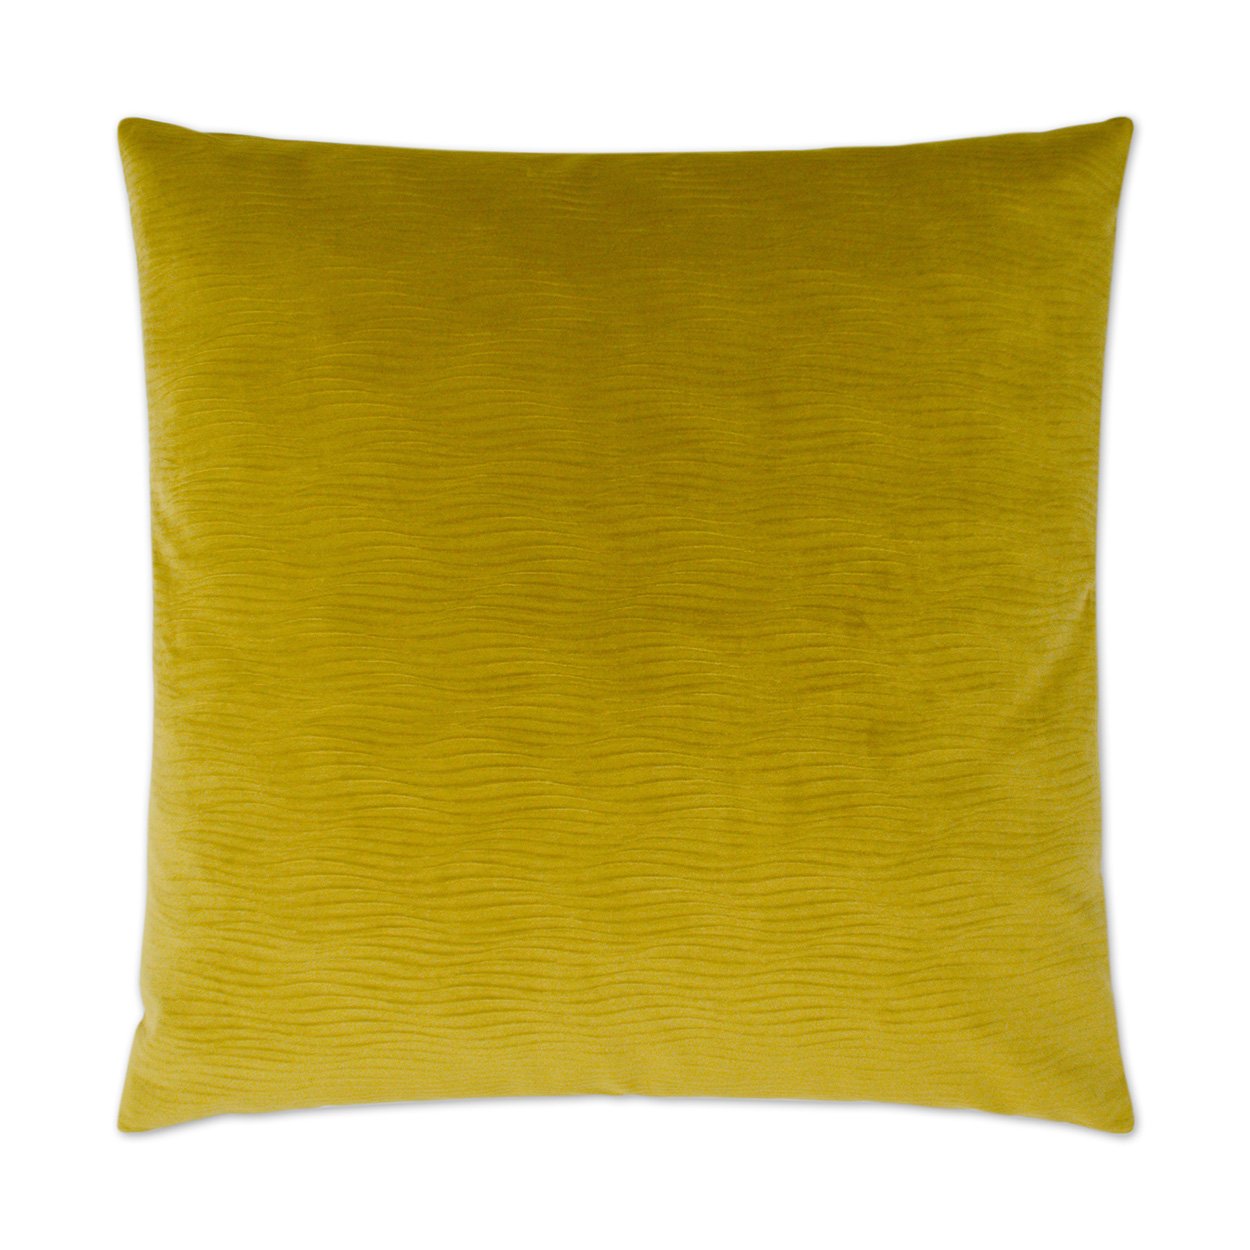 Luxury Pillow - 24” x 24” - Stream Chartreuse; Chartreuse color solid in a soft wavey jacquard fabric